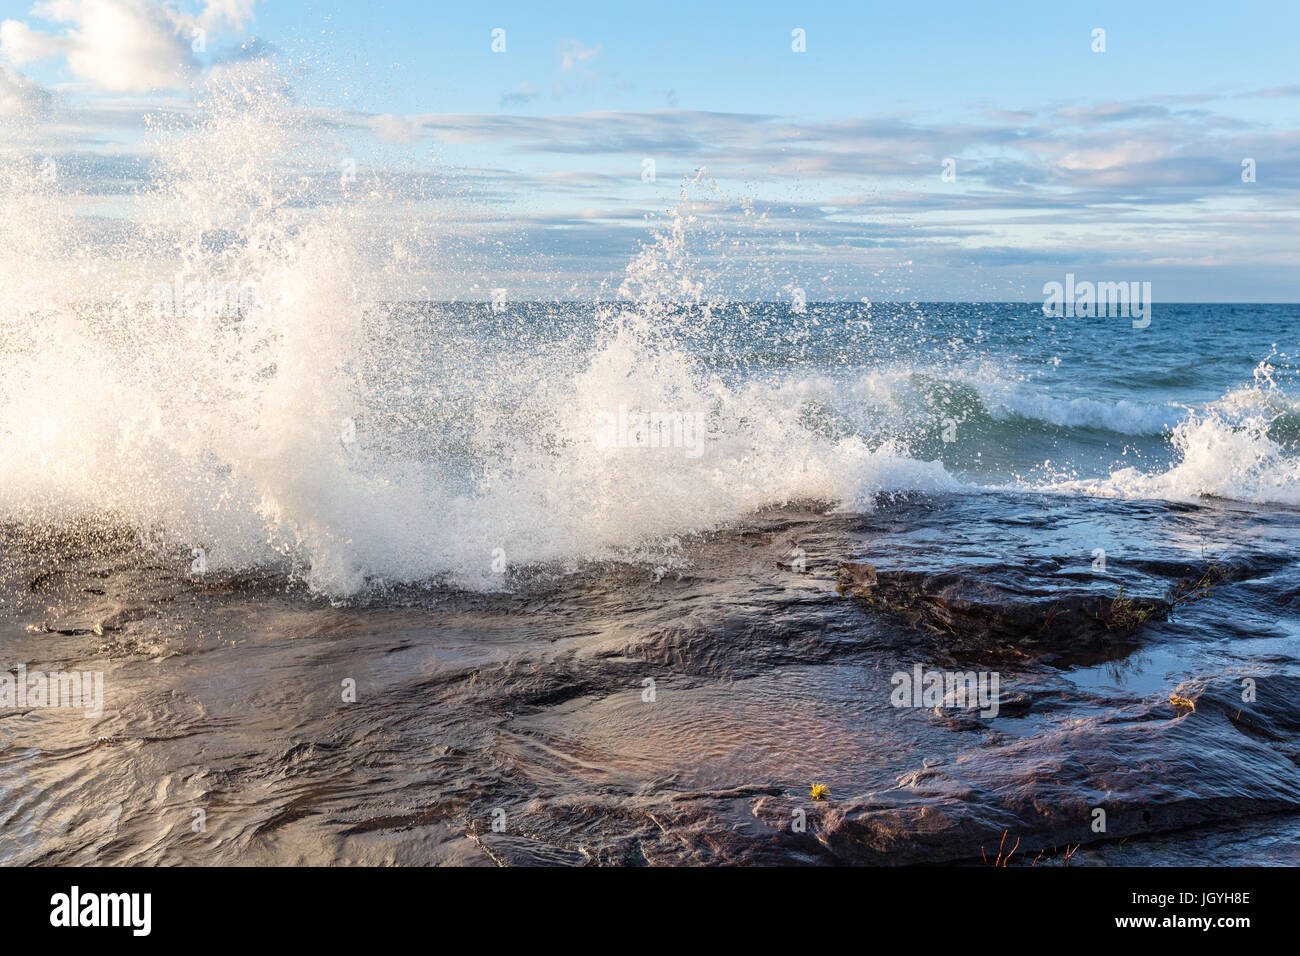 Lake Superior gale force winds drive a crashing wave over sandstone rock at Pictured Rocks National Lakeshore in Munising Michigan Stock Photo